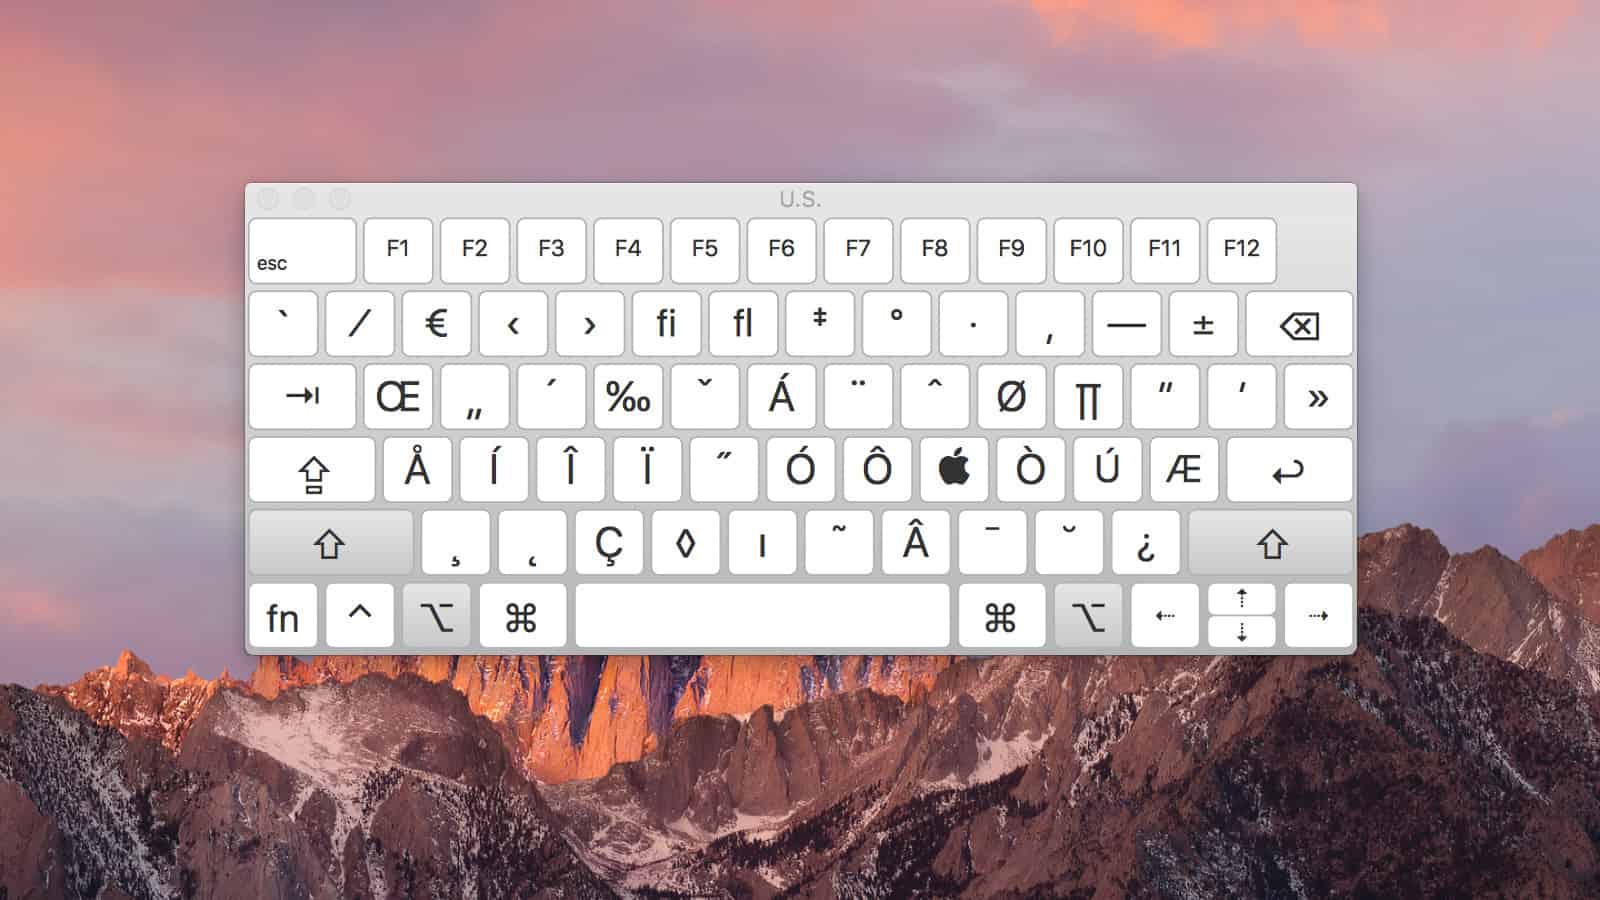 How to Show the Virtual On-Screen Keyboard Viewer in macOS Sierra